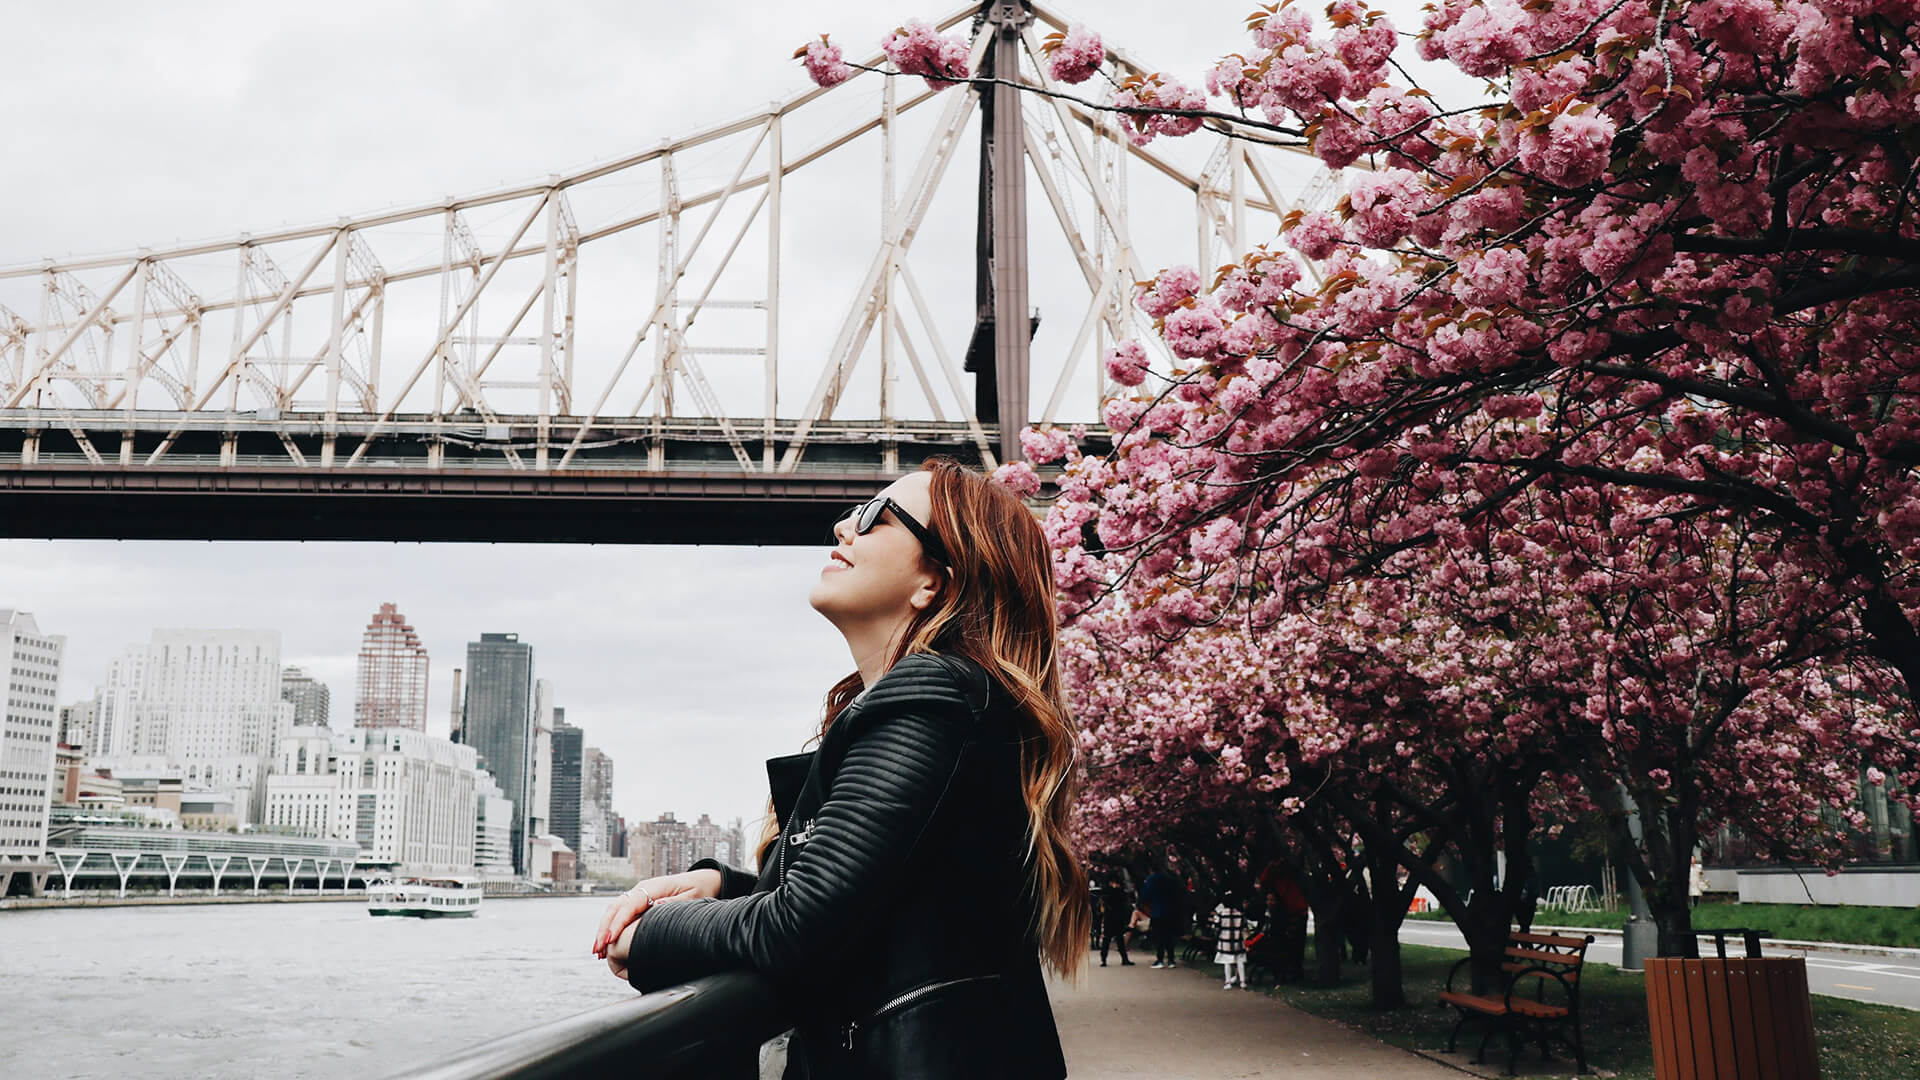 Red haired woman in sunglasses and jacket in LIC next to bridge and cherry blossom smiling and looking up at sky.